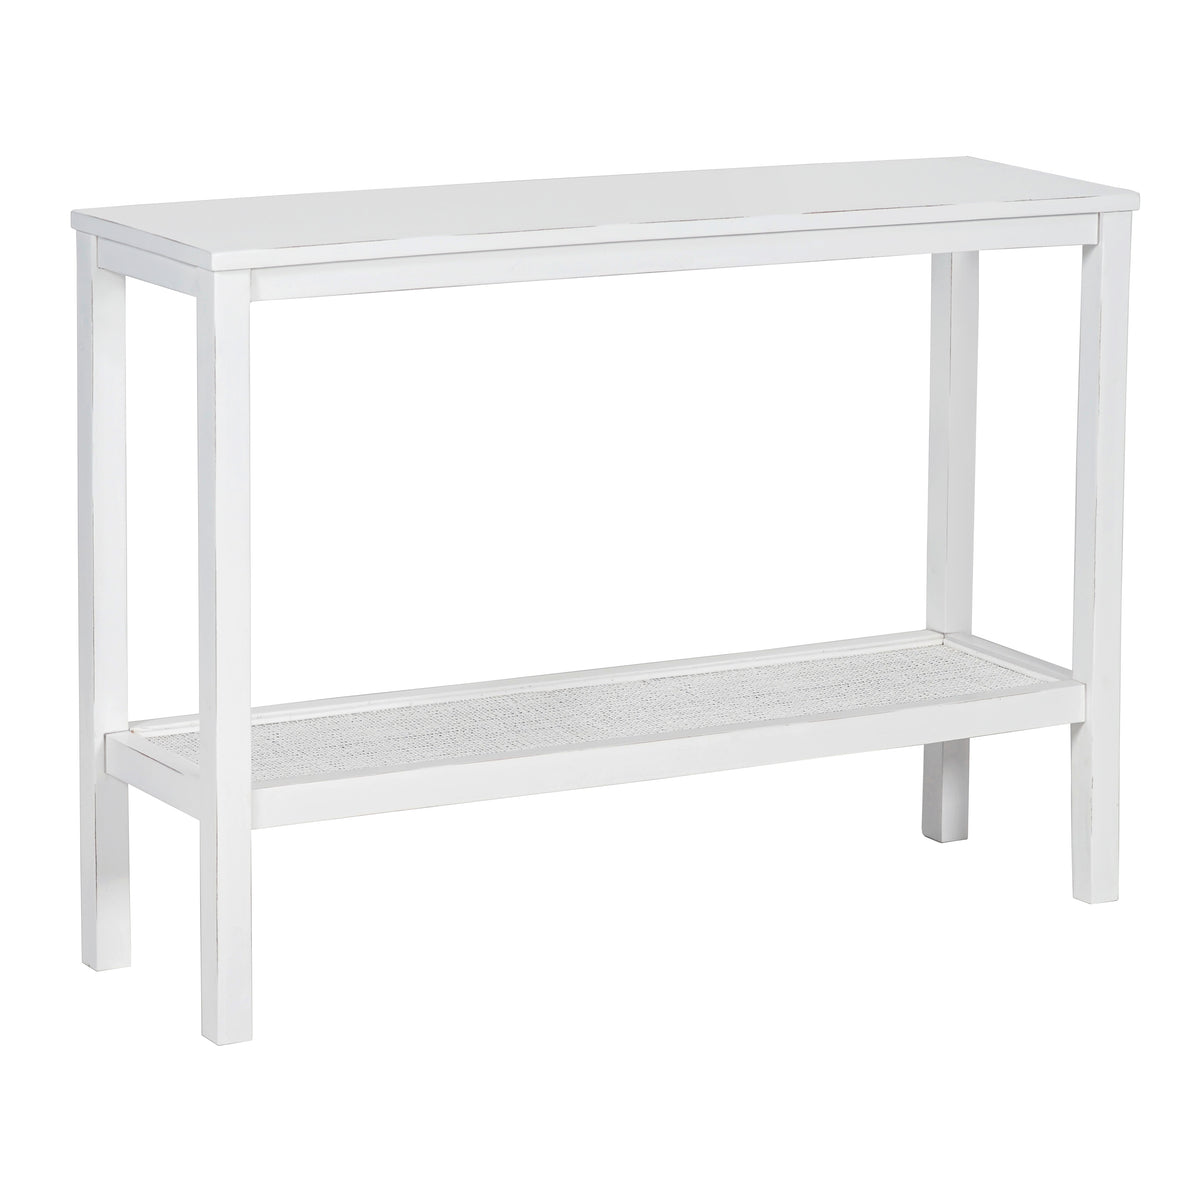 Jasmine Console Table with Mindi Timber Wood Rattan in White - 110cm - Notbrand